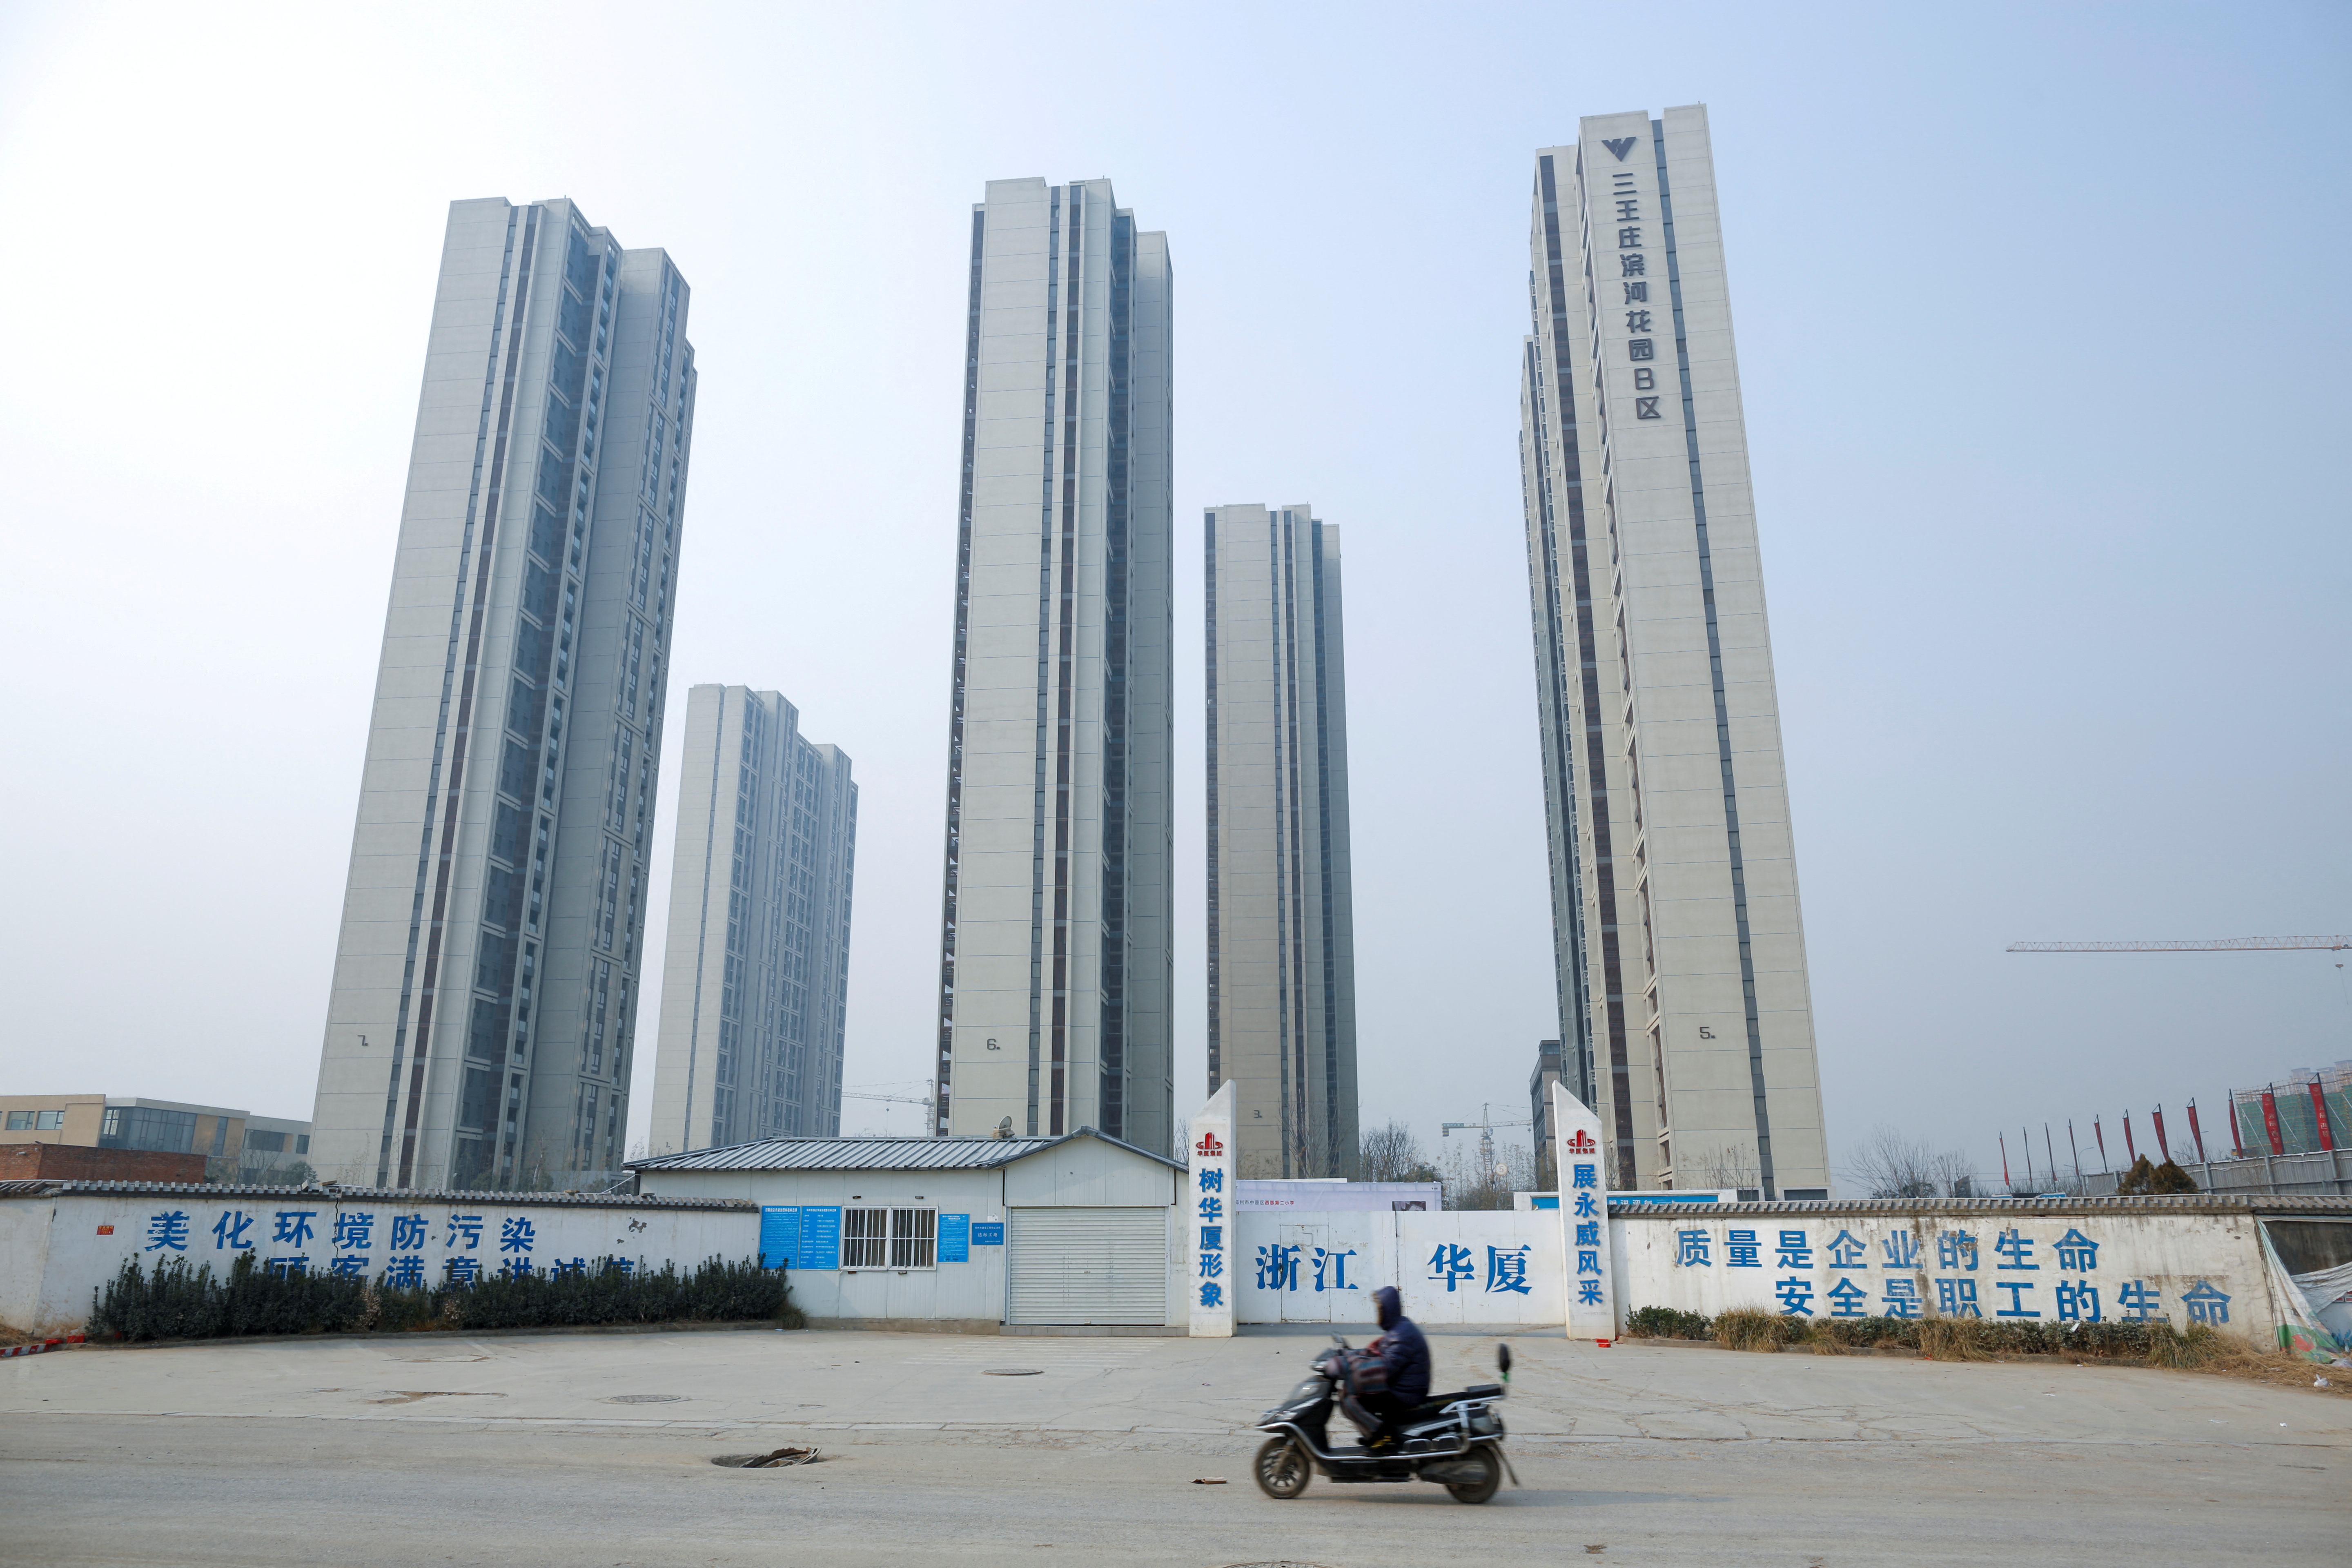 A man rides a scooter past apartment highrises that are under construction near the new stadium in Zhengzhou